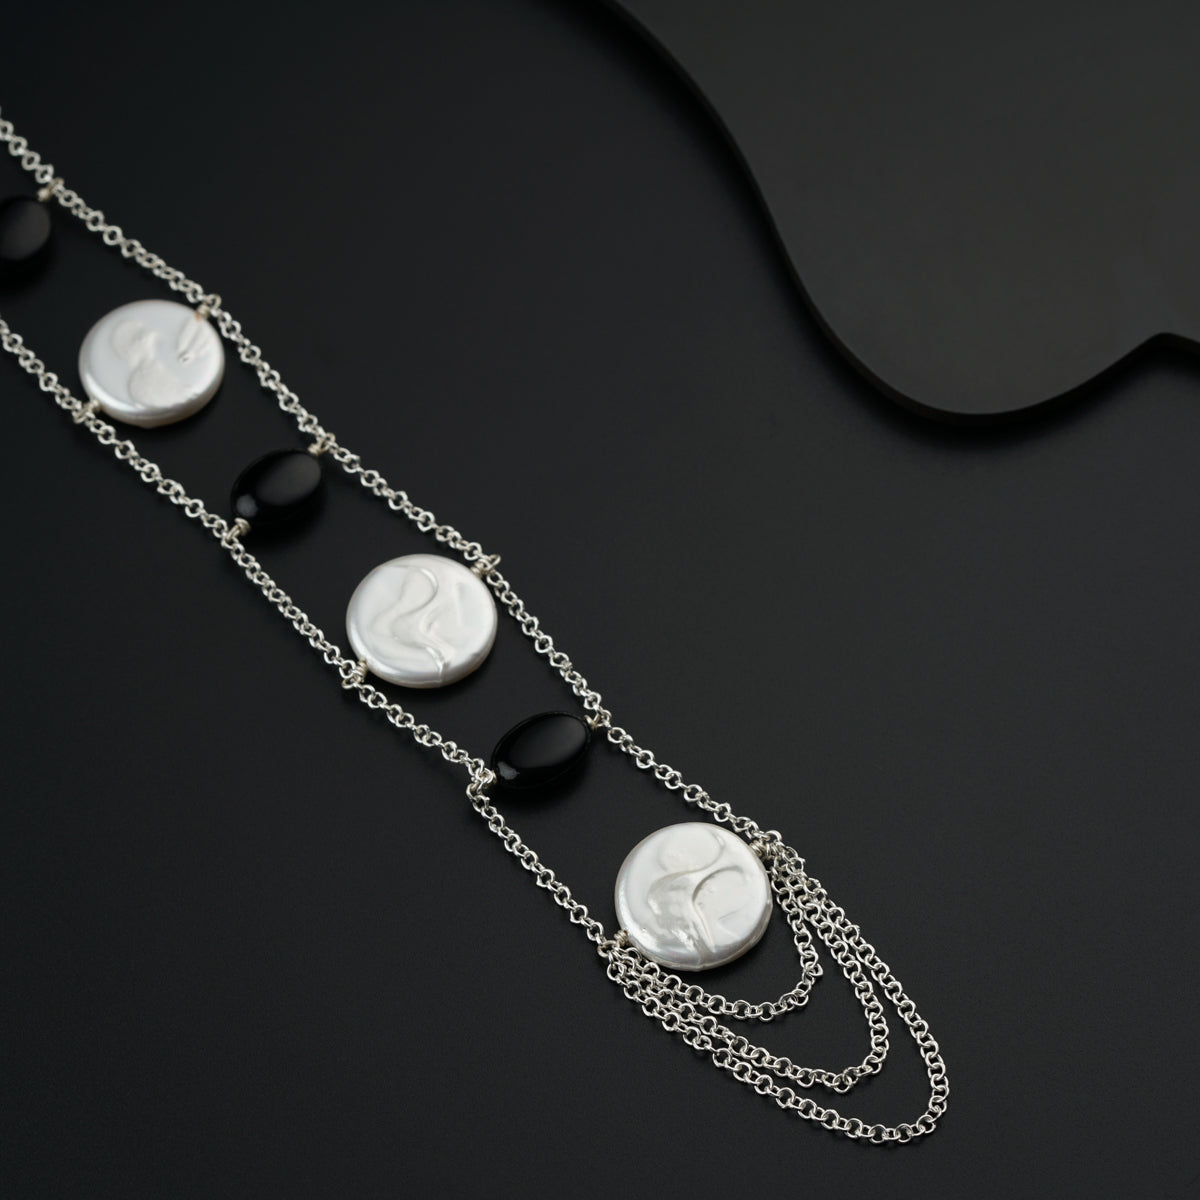 Yin Yang: Silver Bridge Necklace with Coin Pearls and Black Spinel